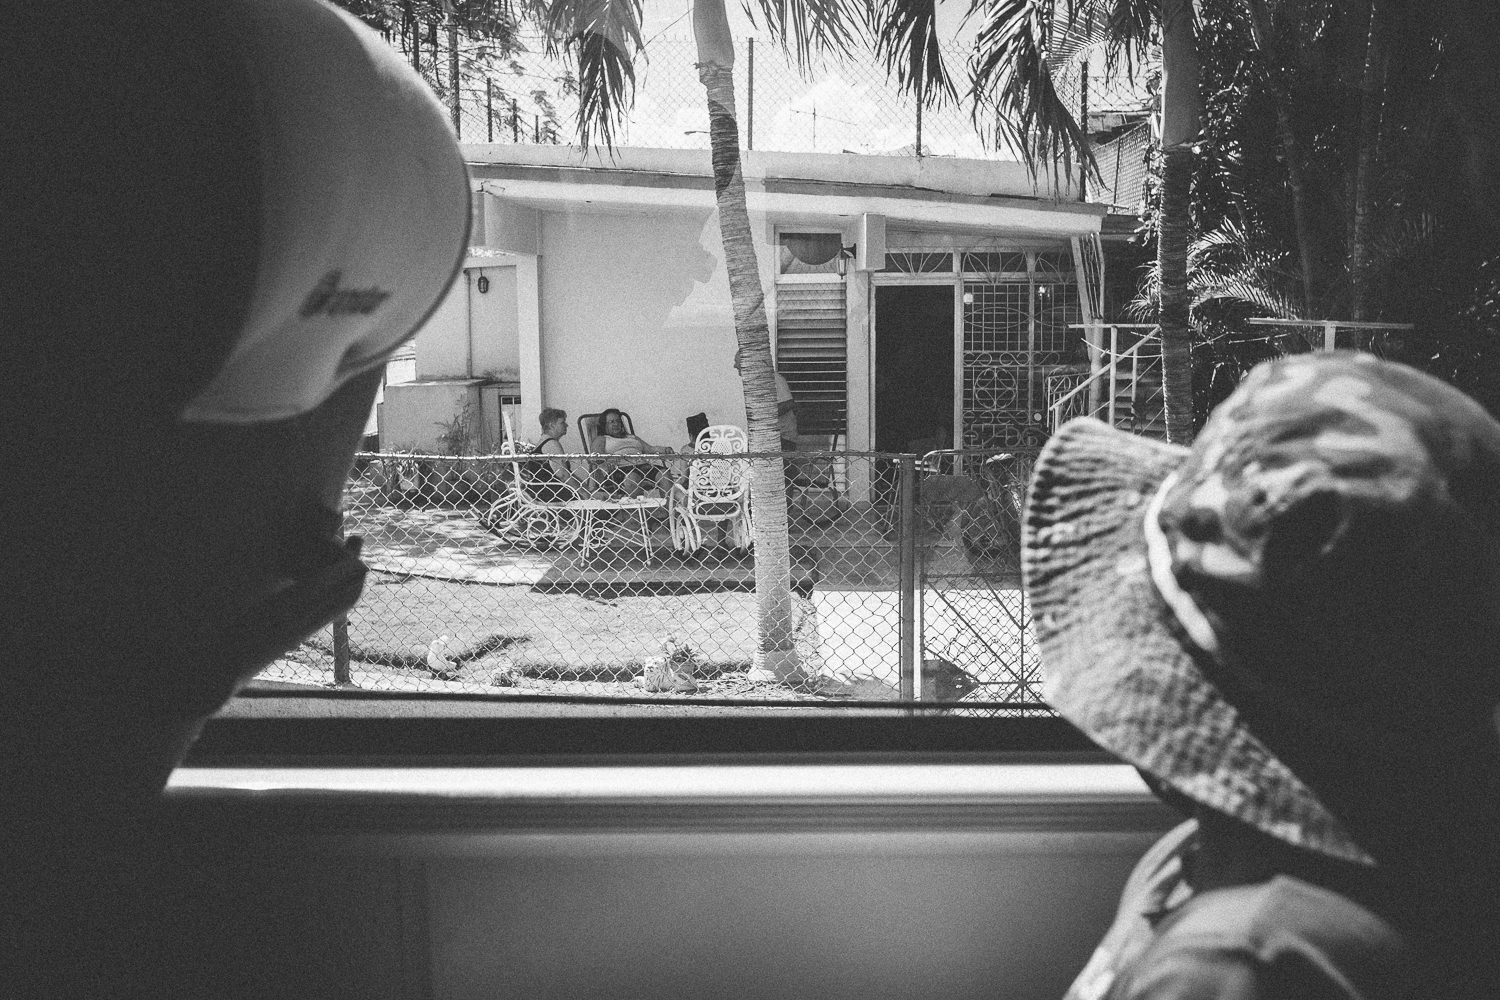  People watching from the tour bus in Varadero, Cuba 2015. 